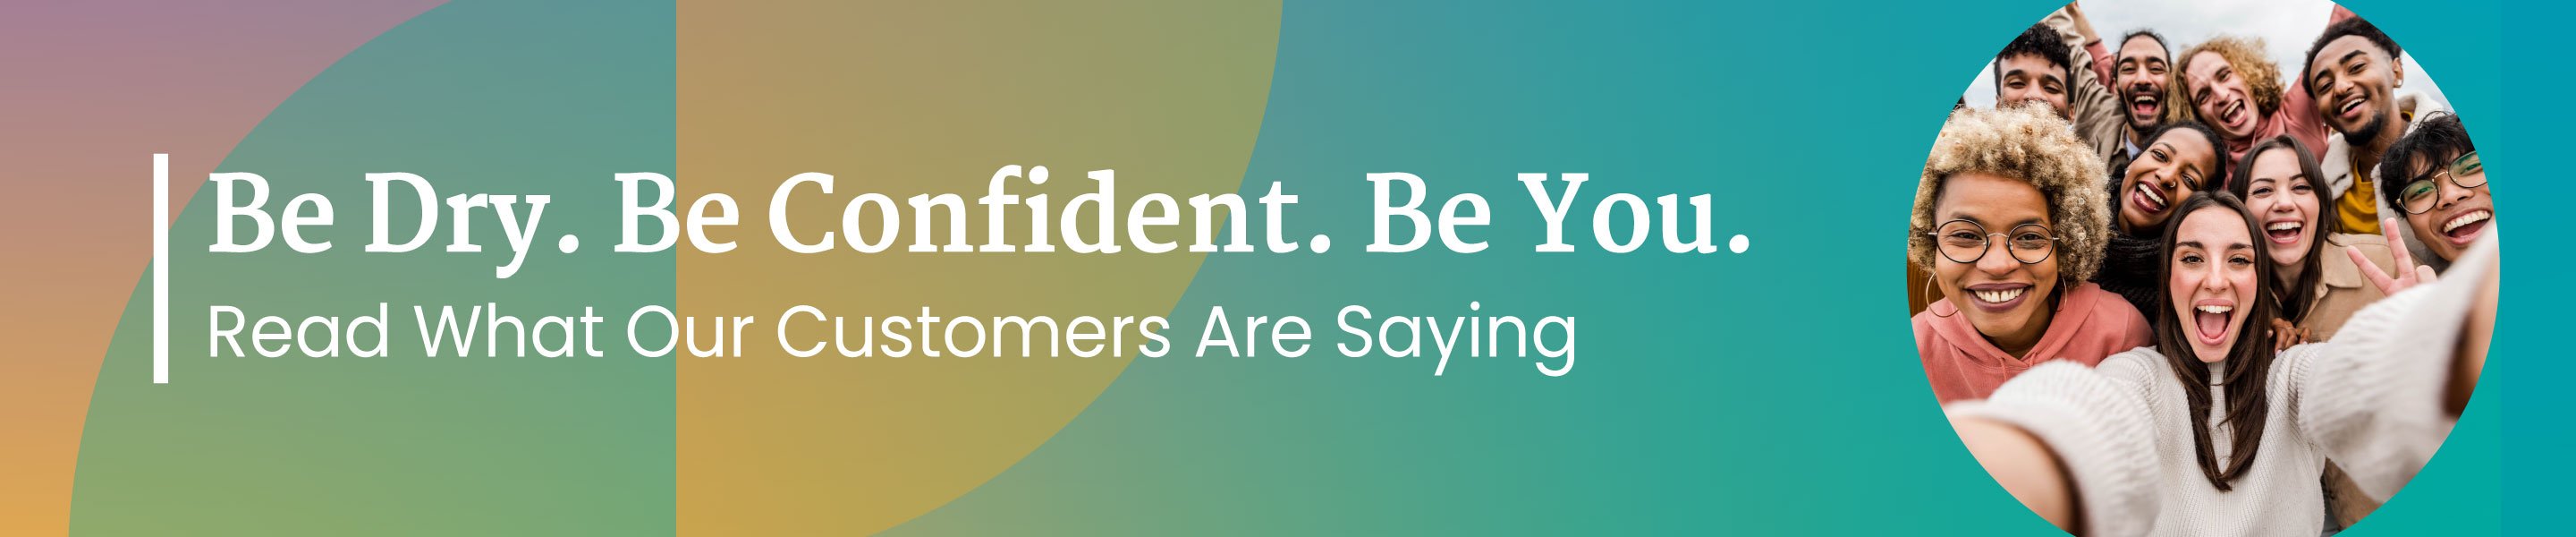 Be Dry. Be Confident. Be You. Read what our customers are saying...